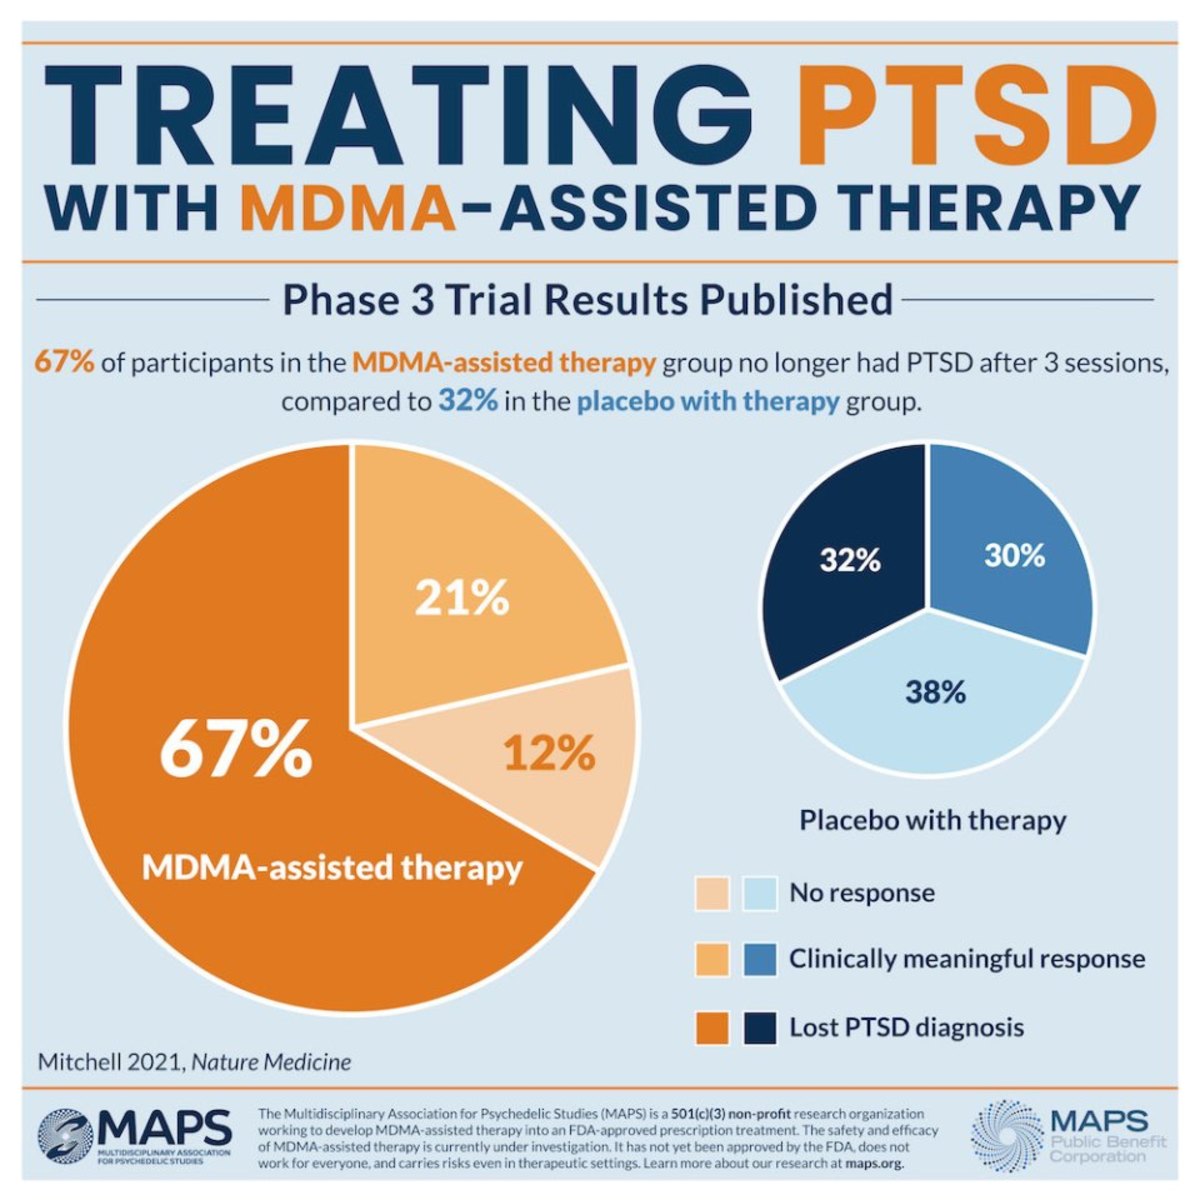 This chart displays results from a study on PTSD and MDMA treatment.